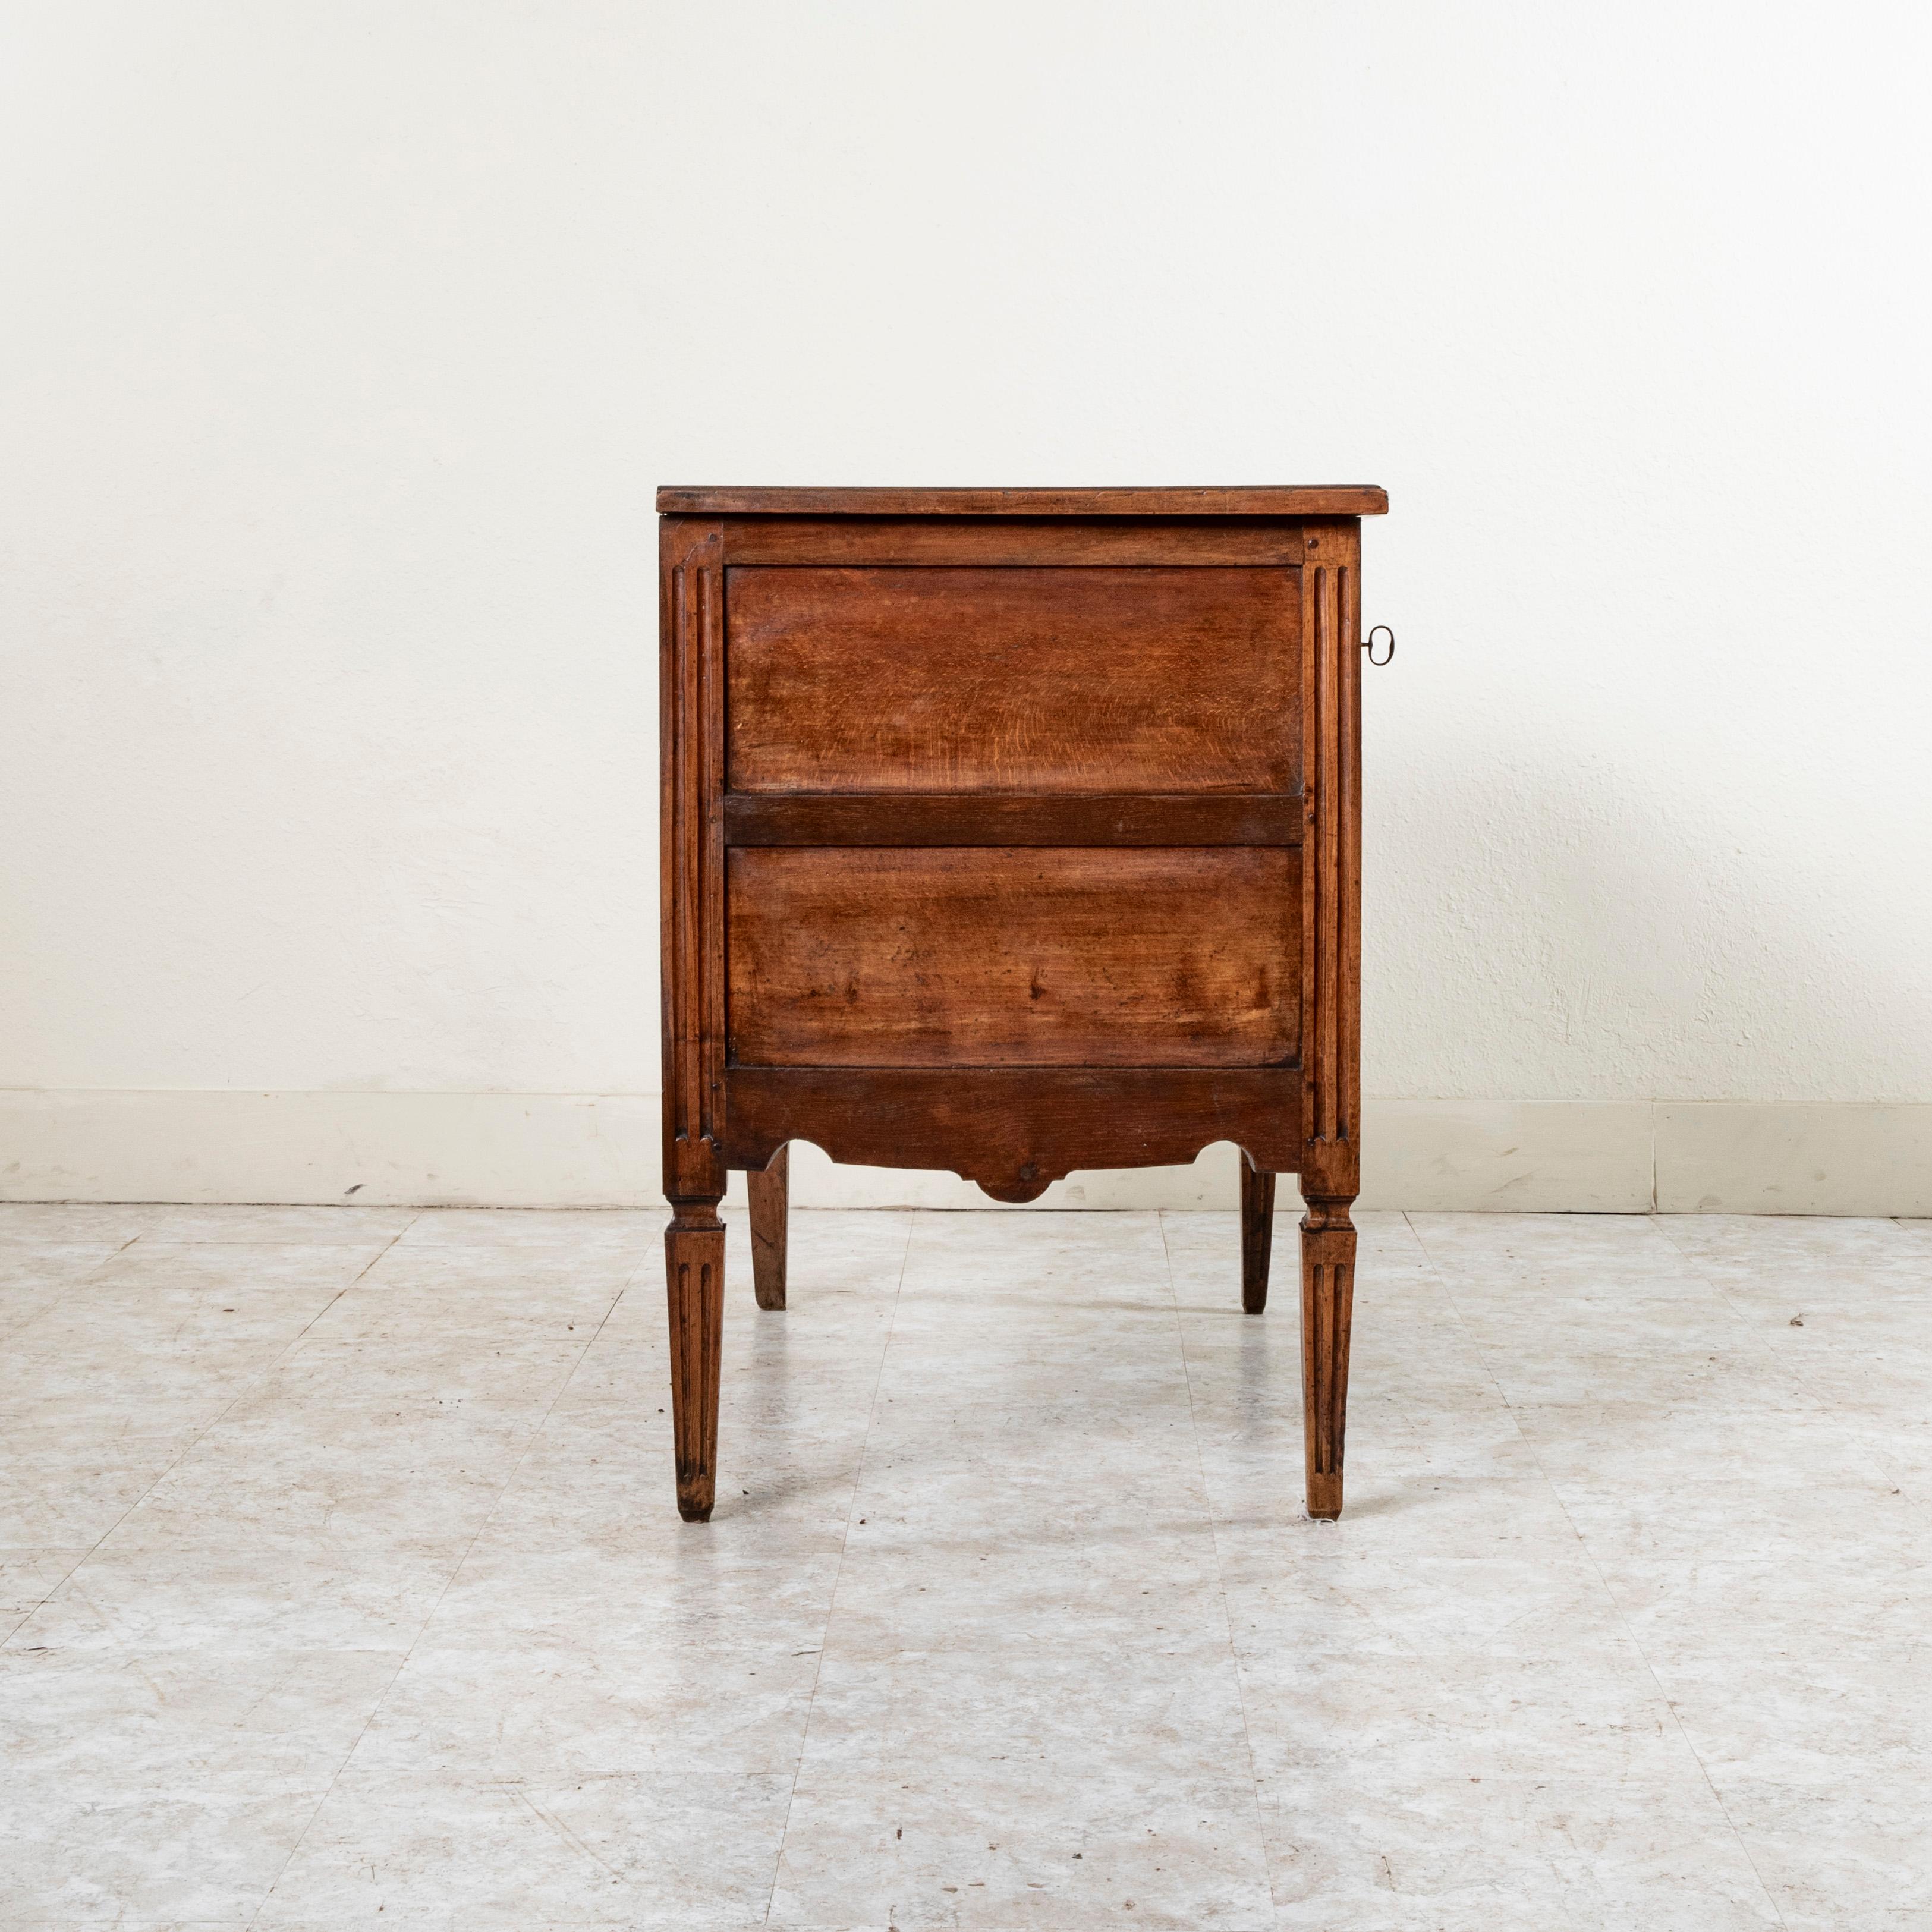 Late 18th Century French Louis XVI Period Walnut Commode or Chest of Drawers 1